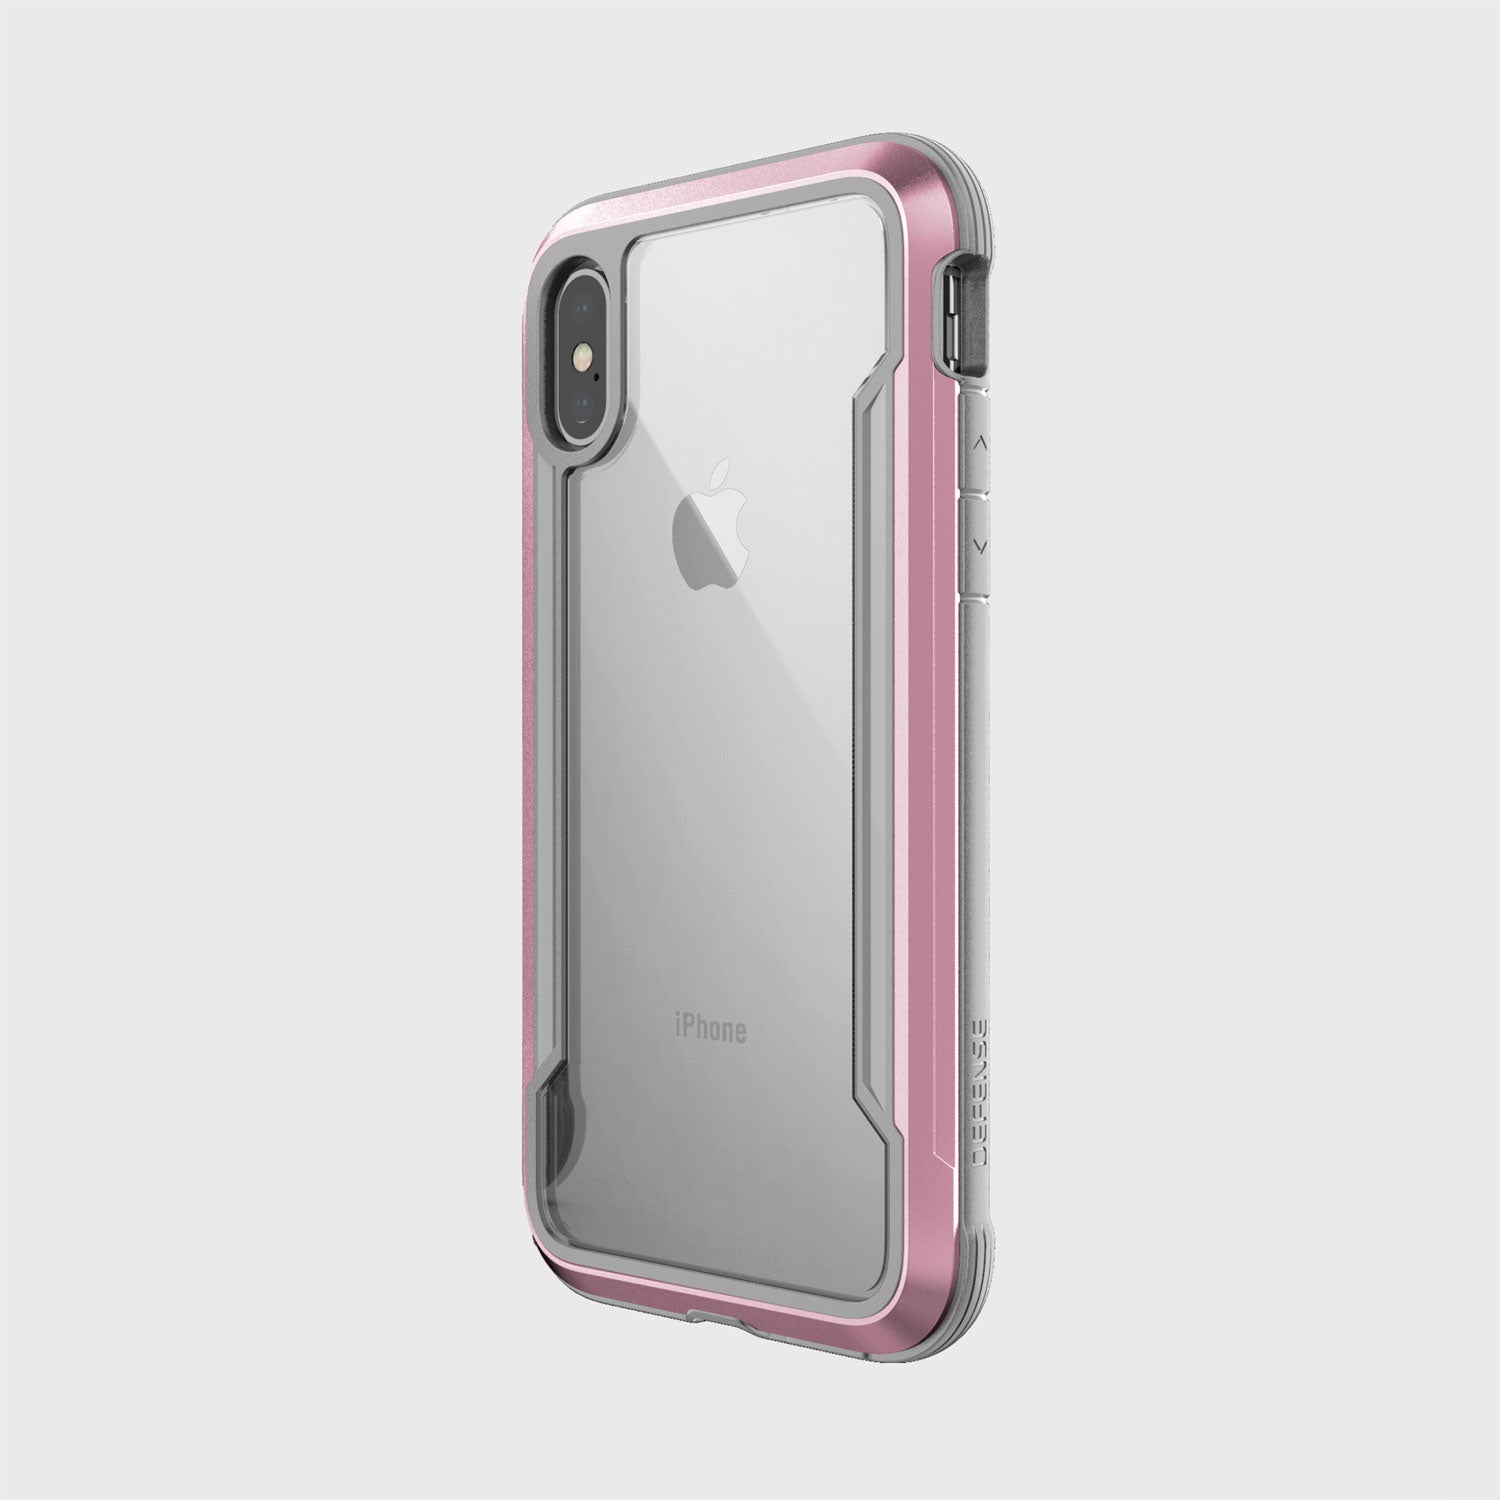 The back view of an iPhone XS Max case in pink, offering drop protection with the Raptic Shield case.